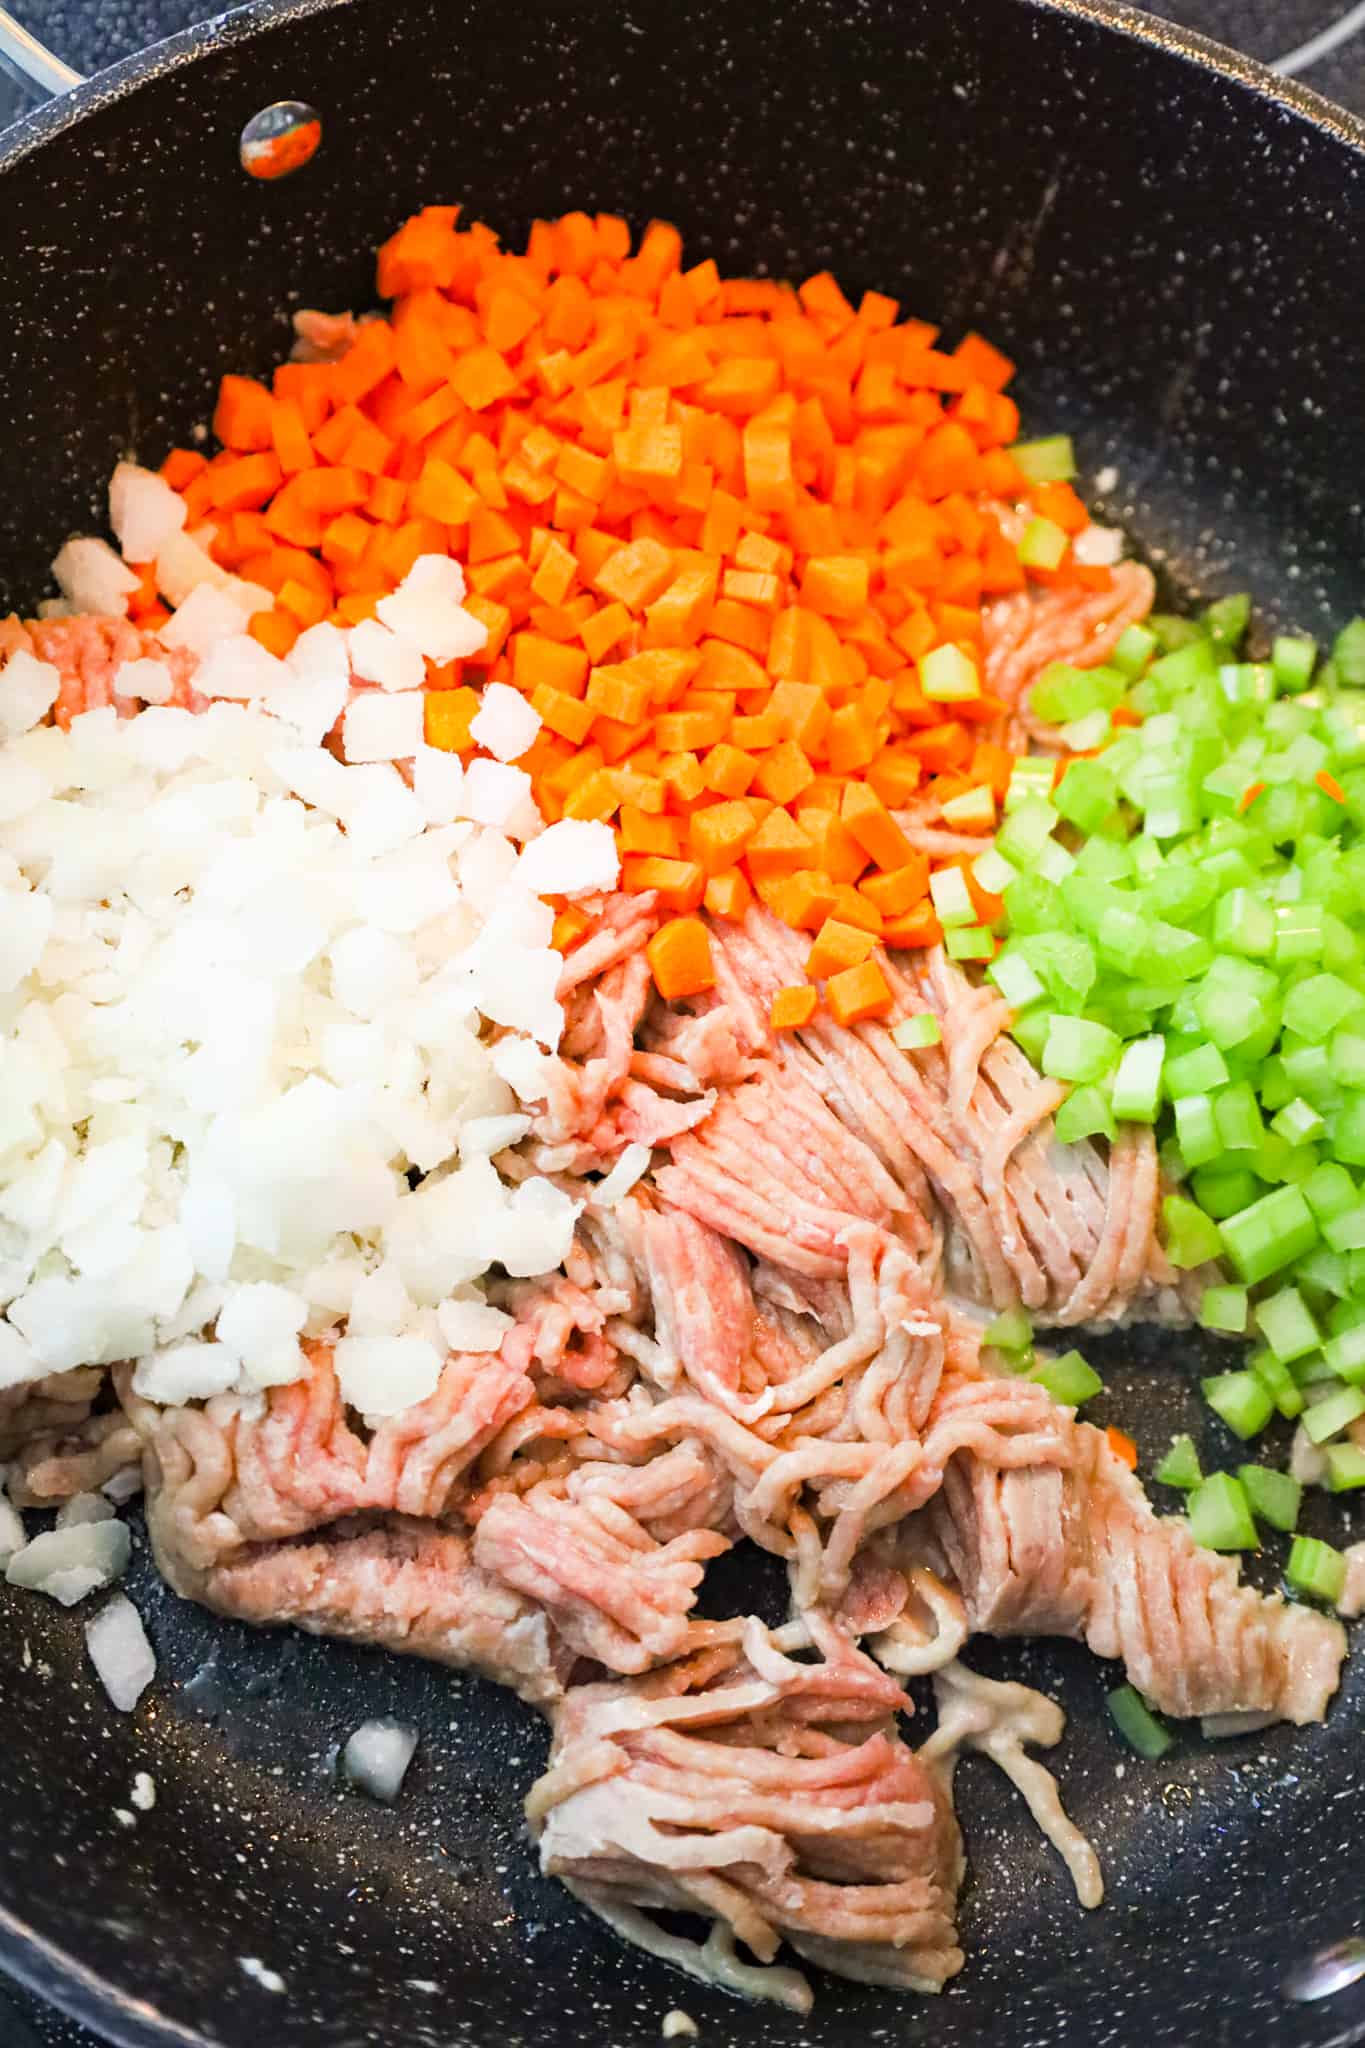 diced onions, diced carrots and diced celery on top of uncooked ground turkey in a skillet